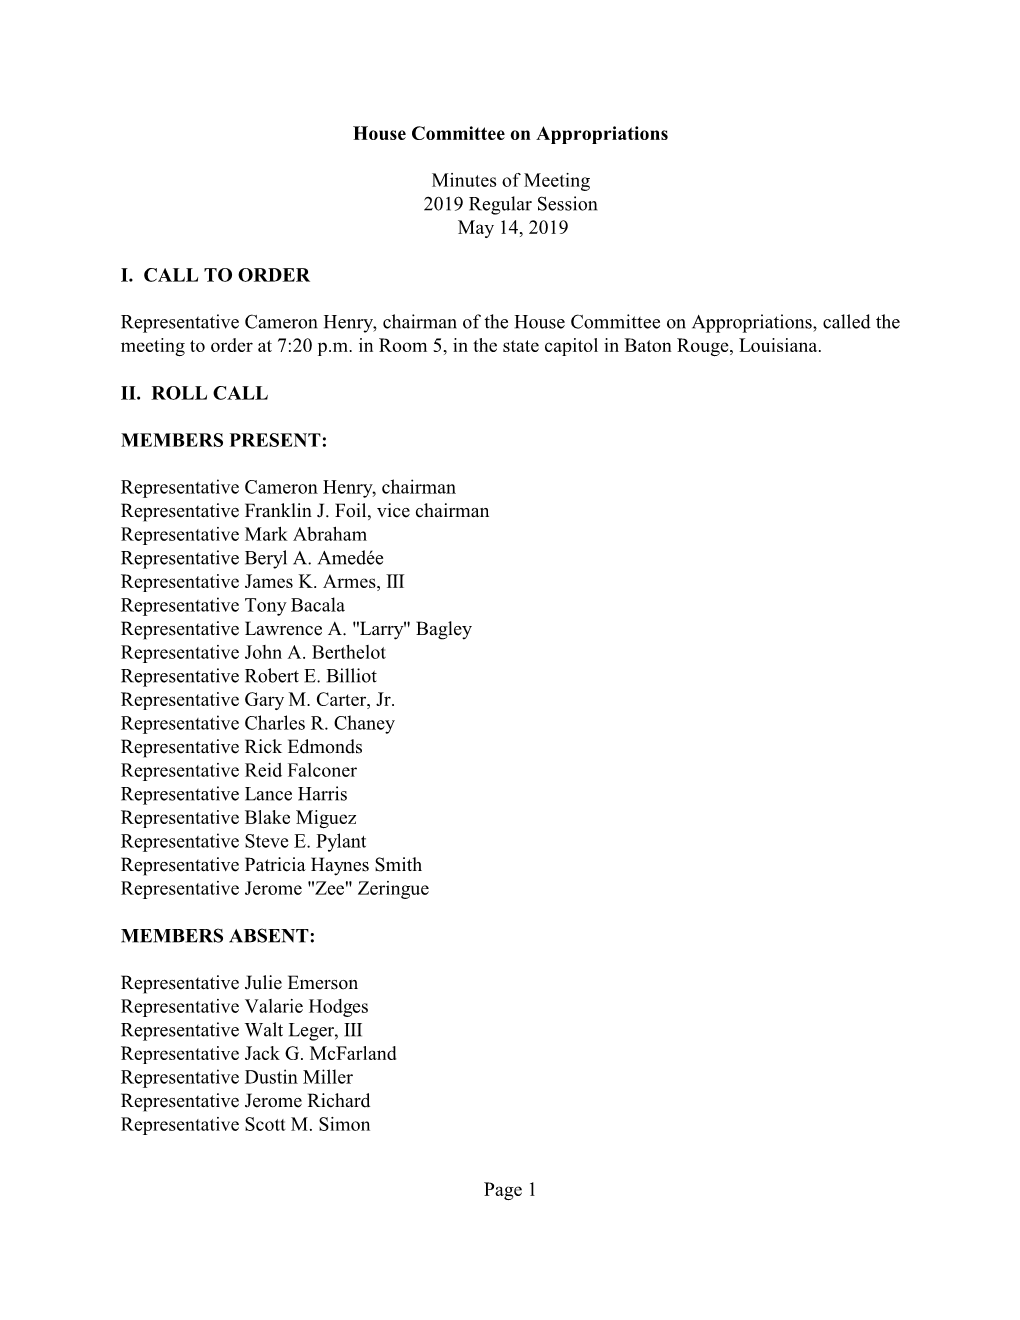 House Committee on Appropriations Minutes of Meeting 2019 Regular